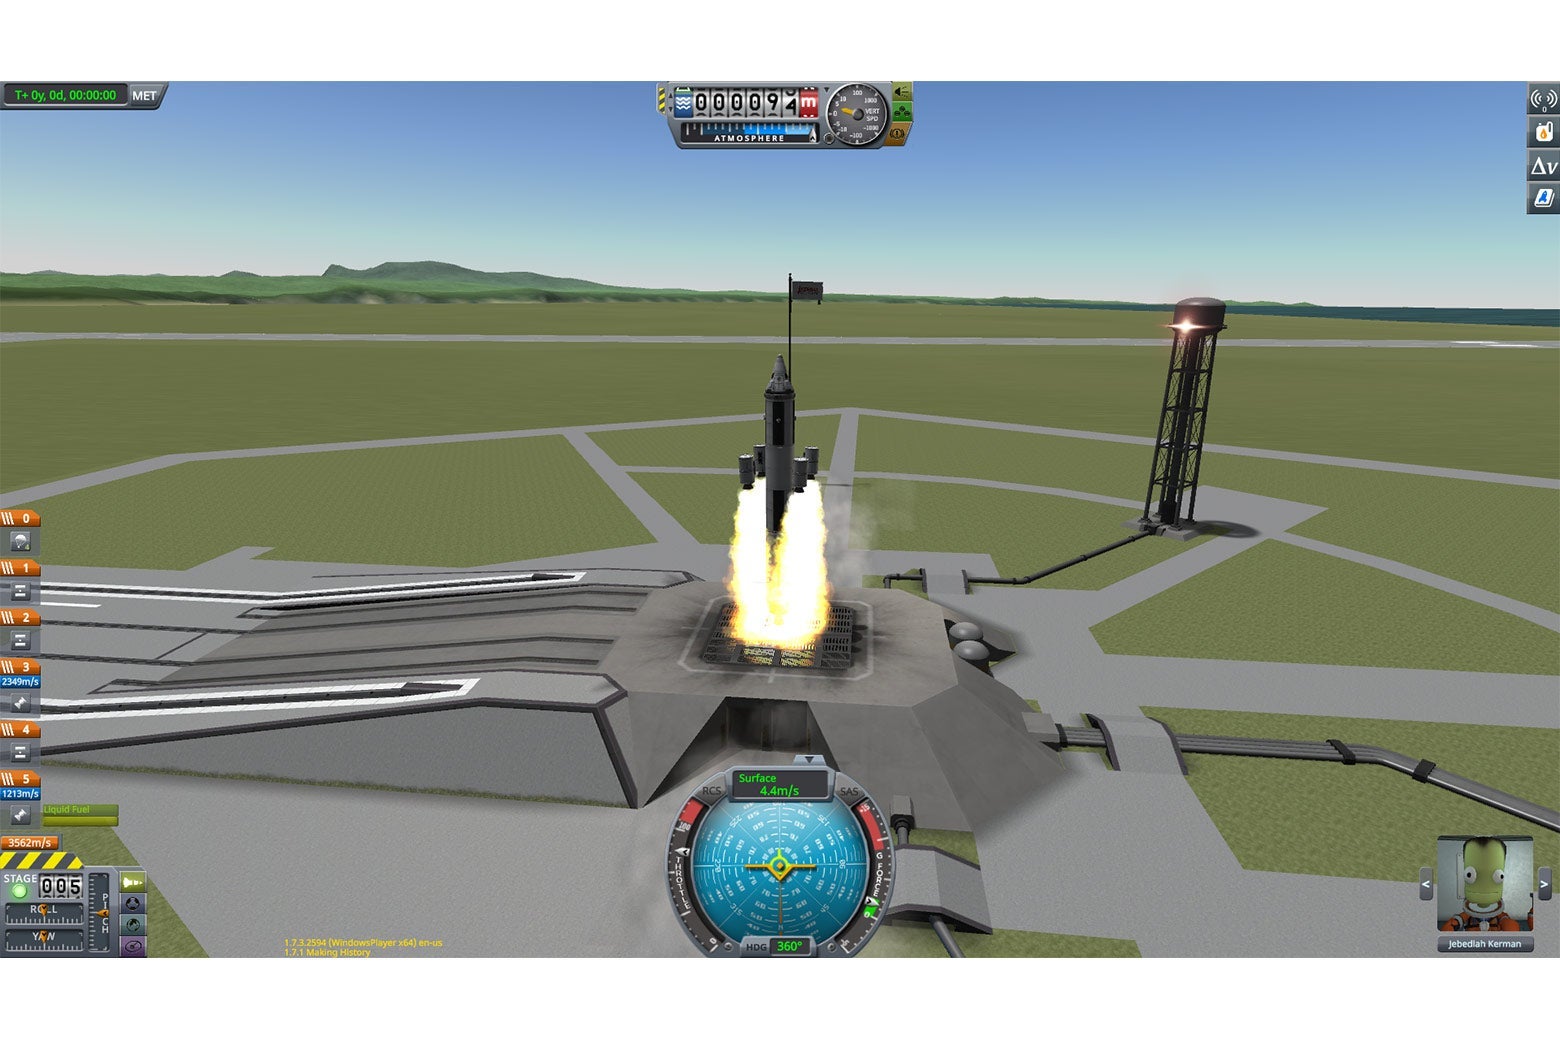 The four rocket boosters decouple from the ship and shoot off toward space right at the launchpad in an unintentional malfunction. In the pilot view window, Jebediah Kerman looks positively distressed.